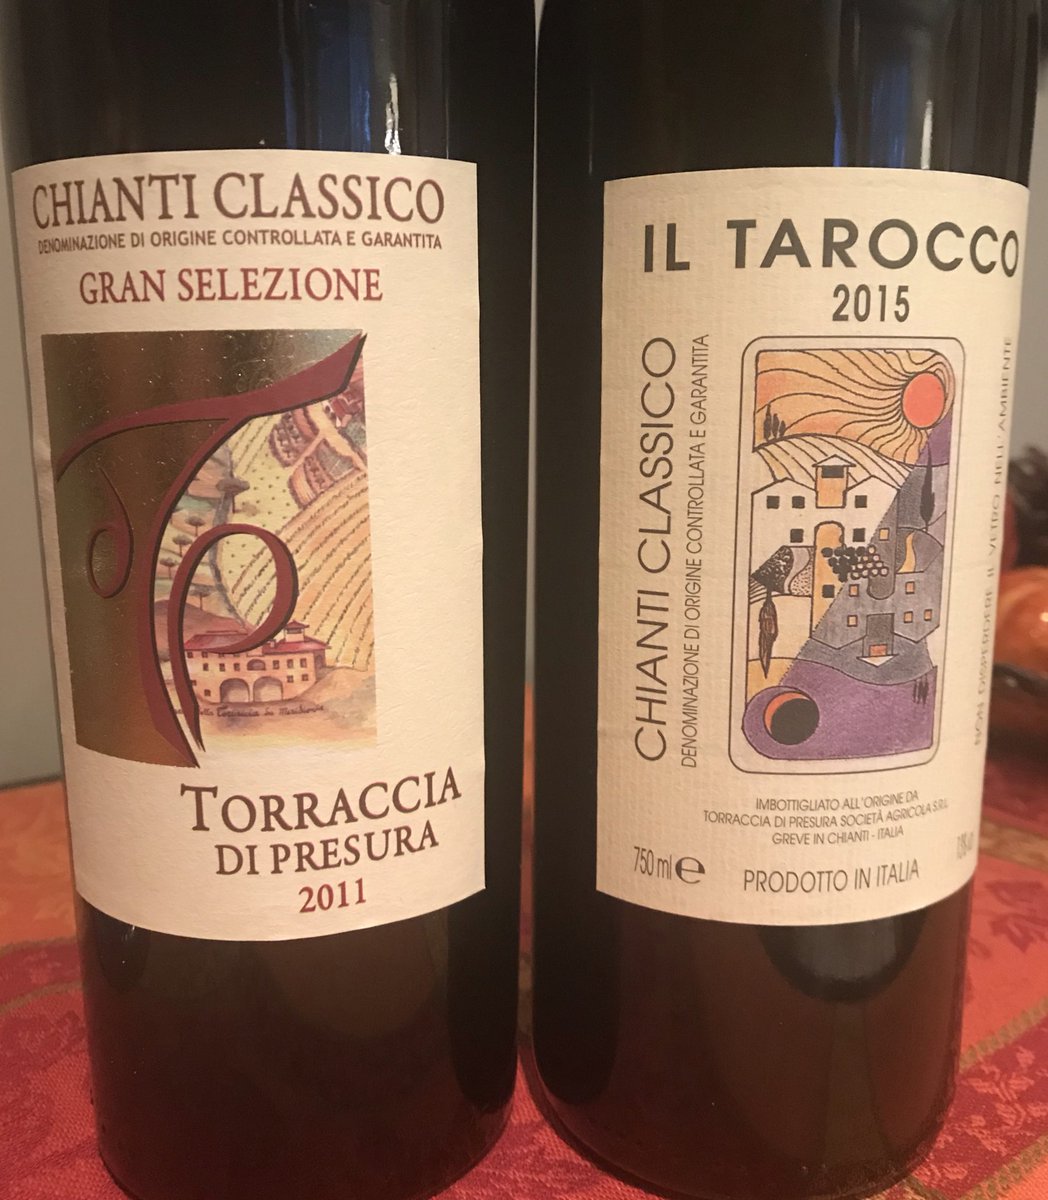 A few chianti finds from @TorracciaPresur estate  in Greve. Tasted Il Tarocco today with @Ahachey101  and was quite impressed.  @SelectionsOeno